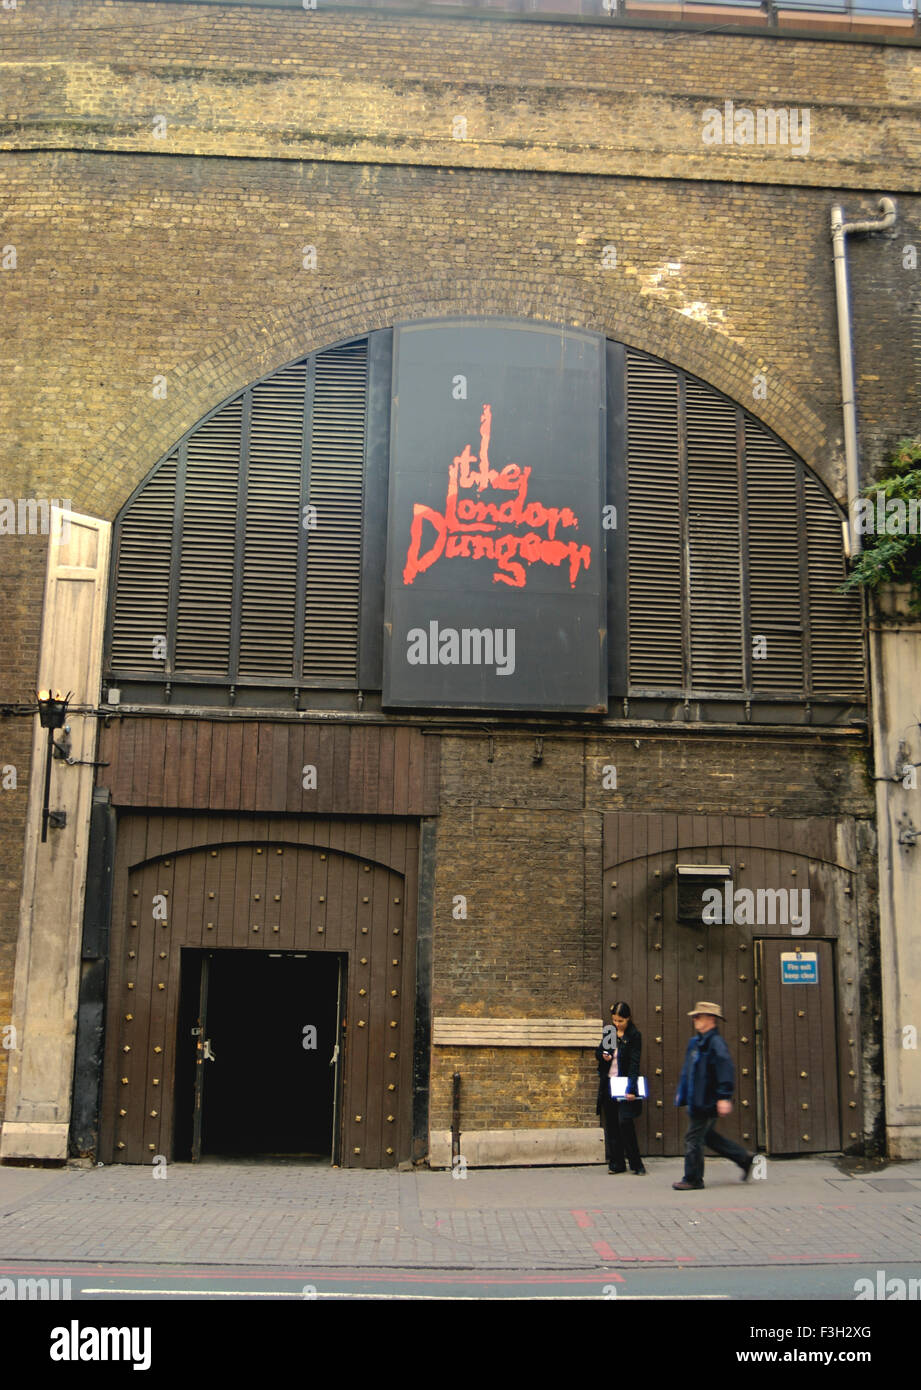 The London Dungeon, The Dungeons London, The Queen's Walk, London's South Bank, Londra, Inghilterra, Regno Unito, Regno Unito Foto Stock